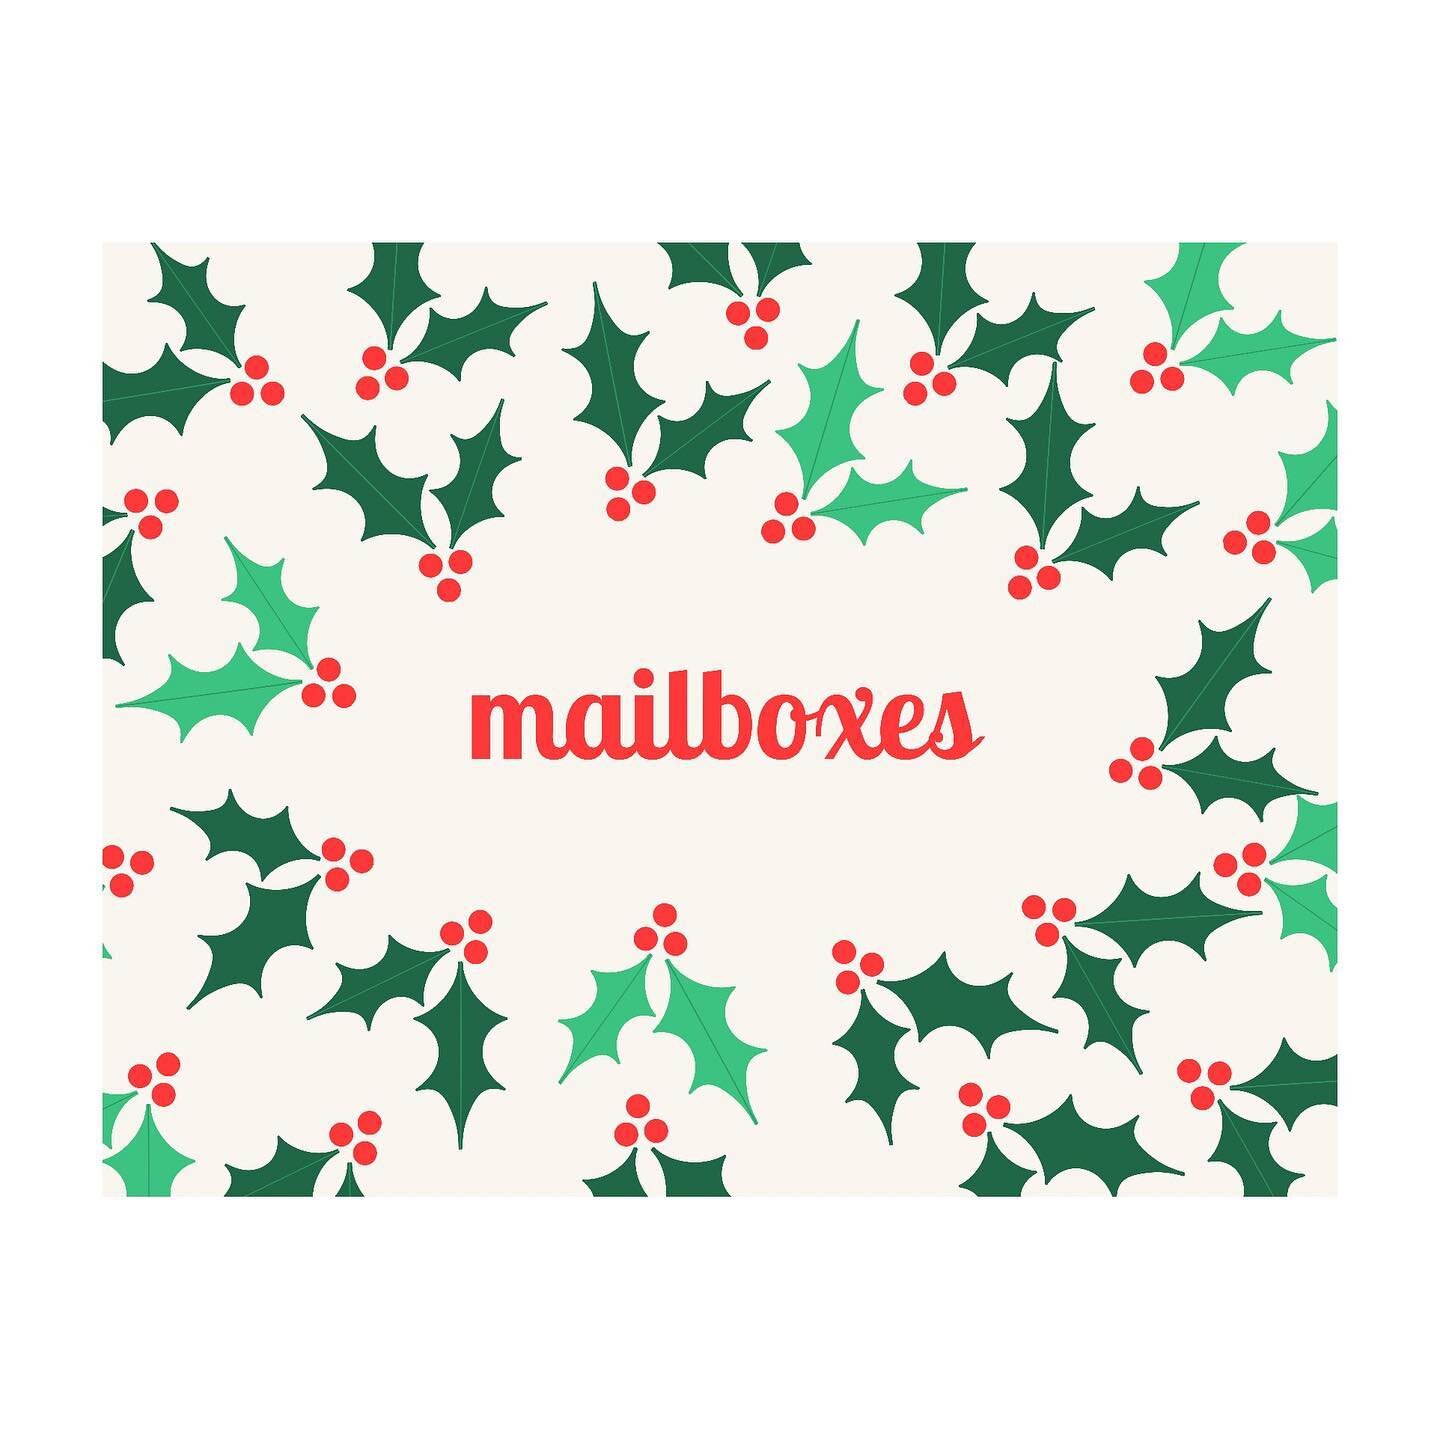 come sleet, snow, rain or christmas (okay perhaps not a pandemic), your mail will look infinitely better decorate. like this for christmas or even ecumenically celebrated holidays. we appeal to all! 
happy #pgchristmasinjuly 
🎄❤️ xo, pg

__

#merryc